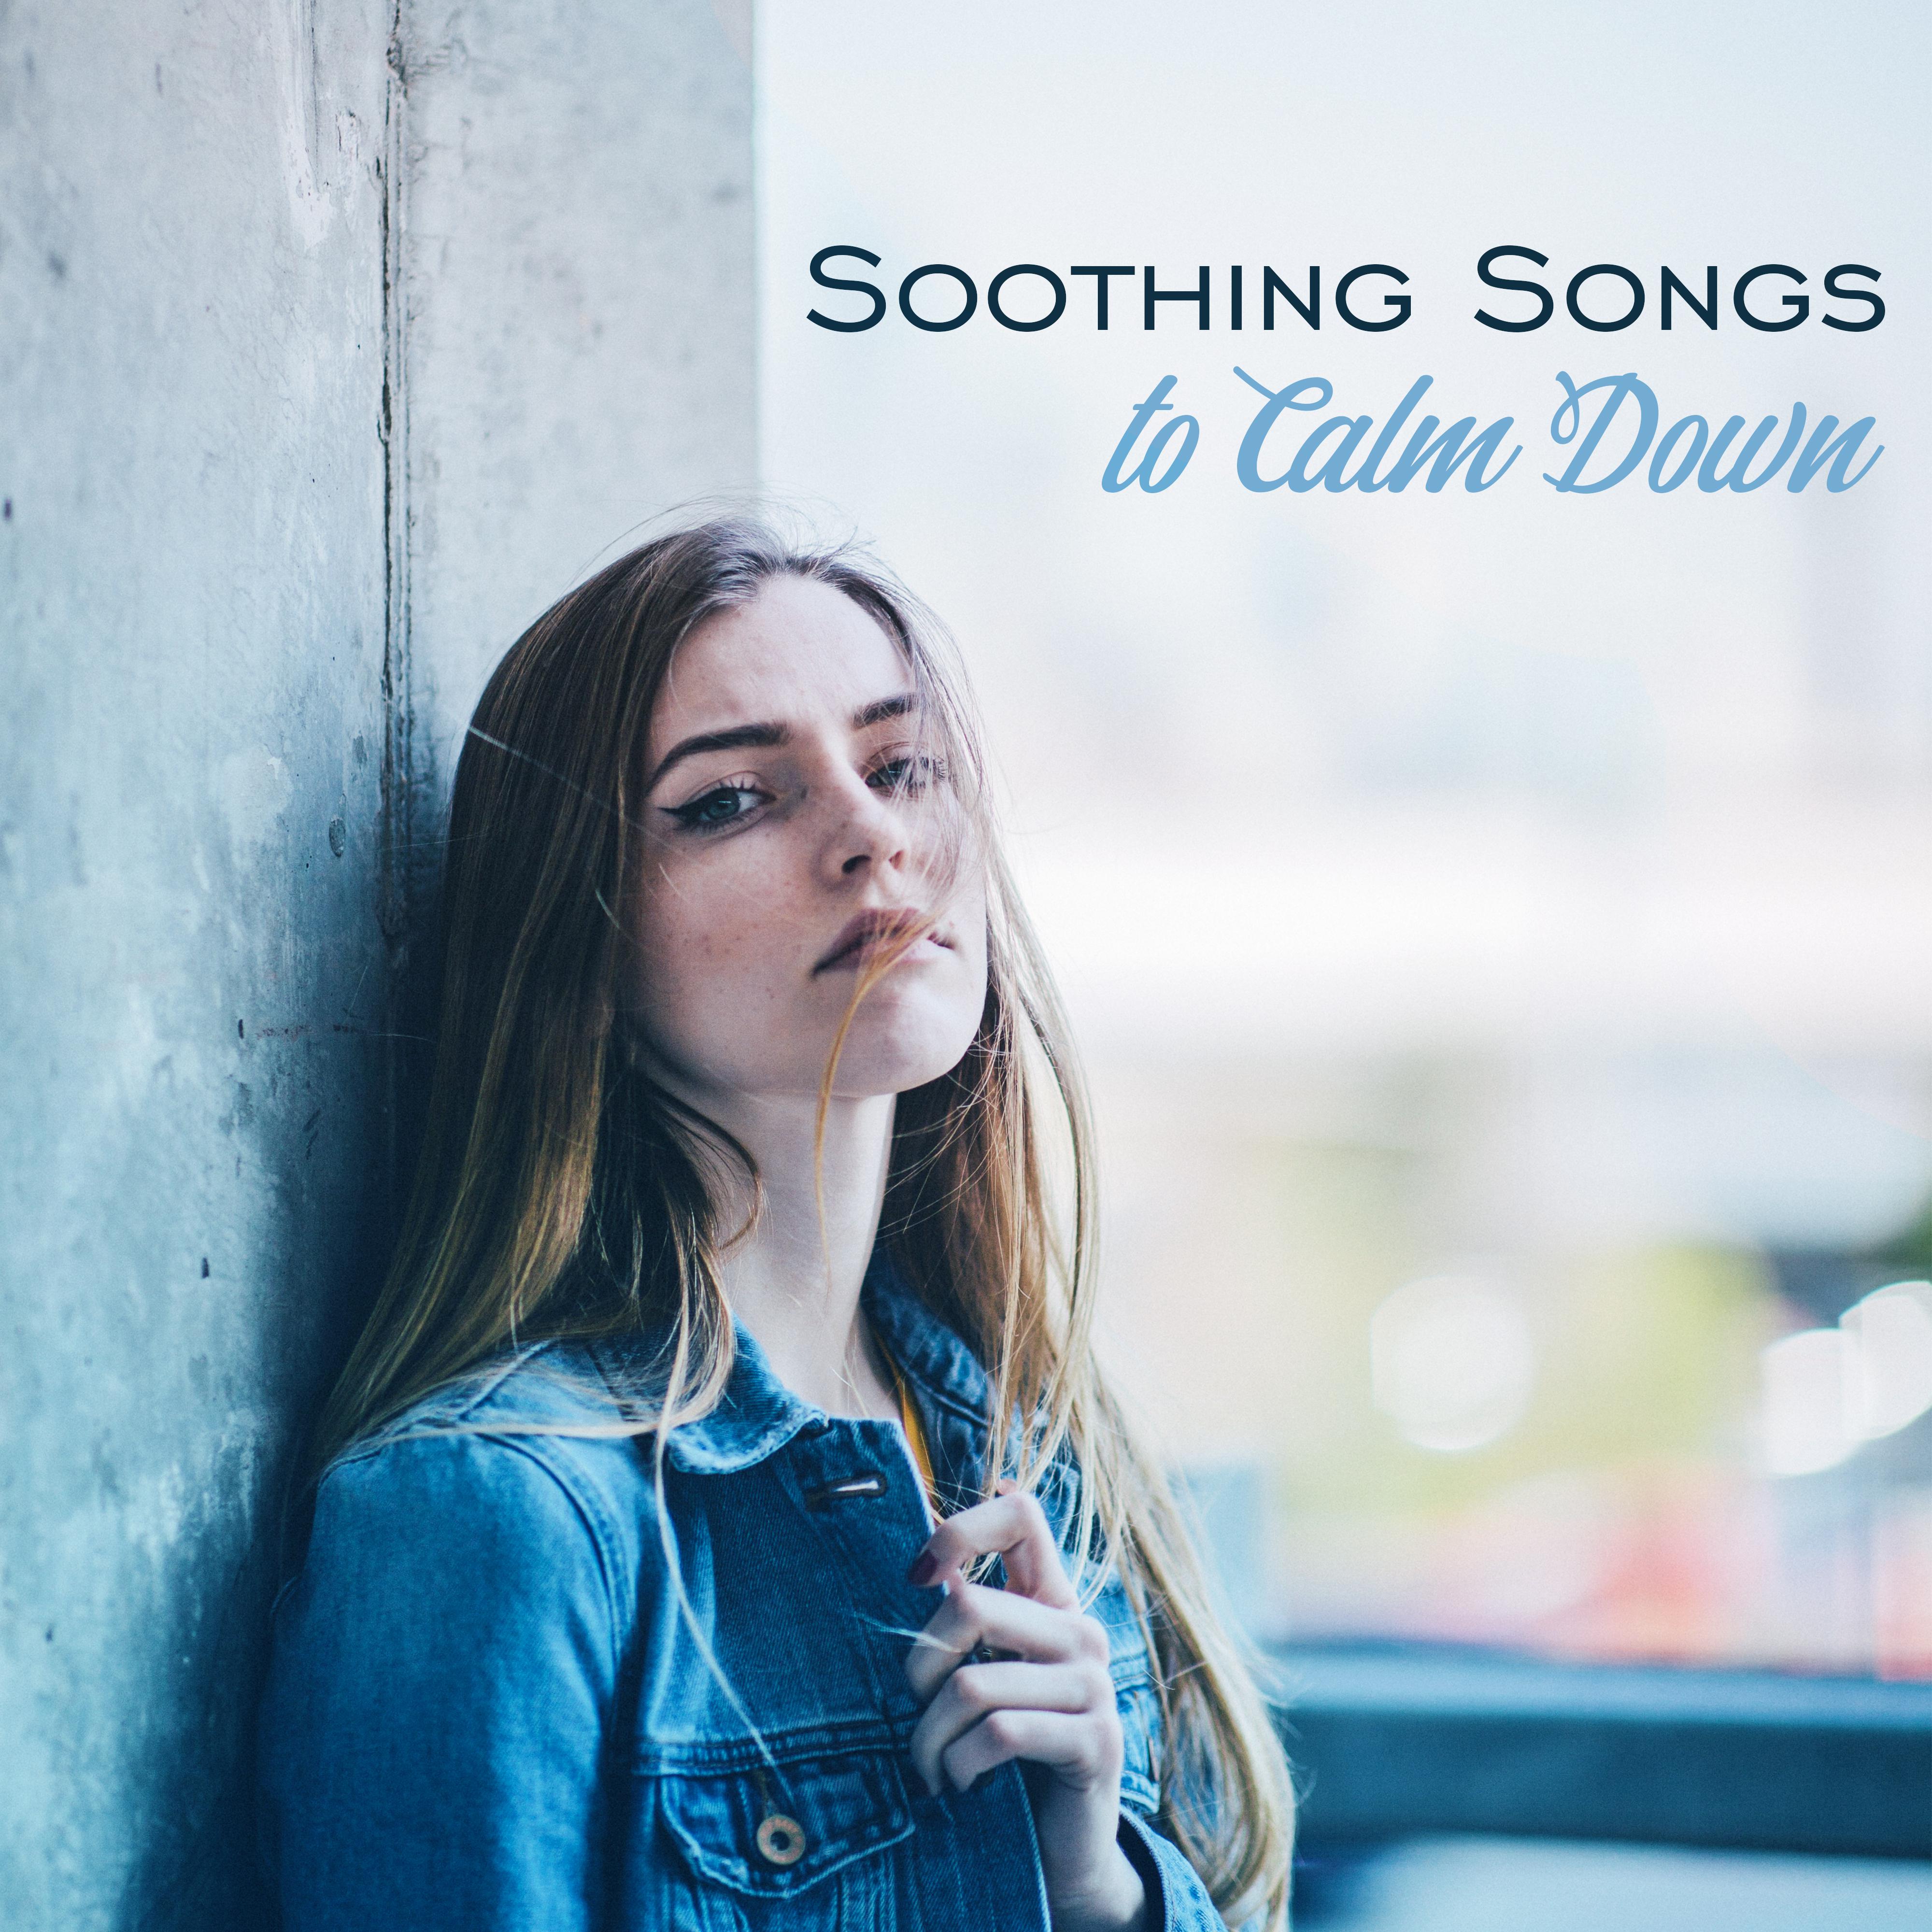 Soothing Songs to Calm Down